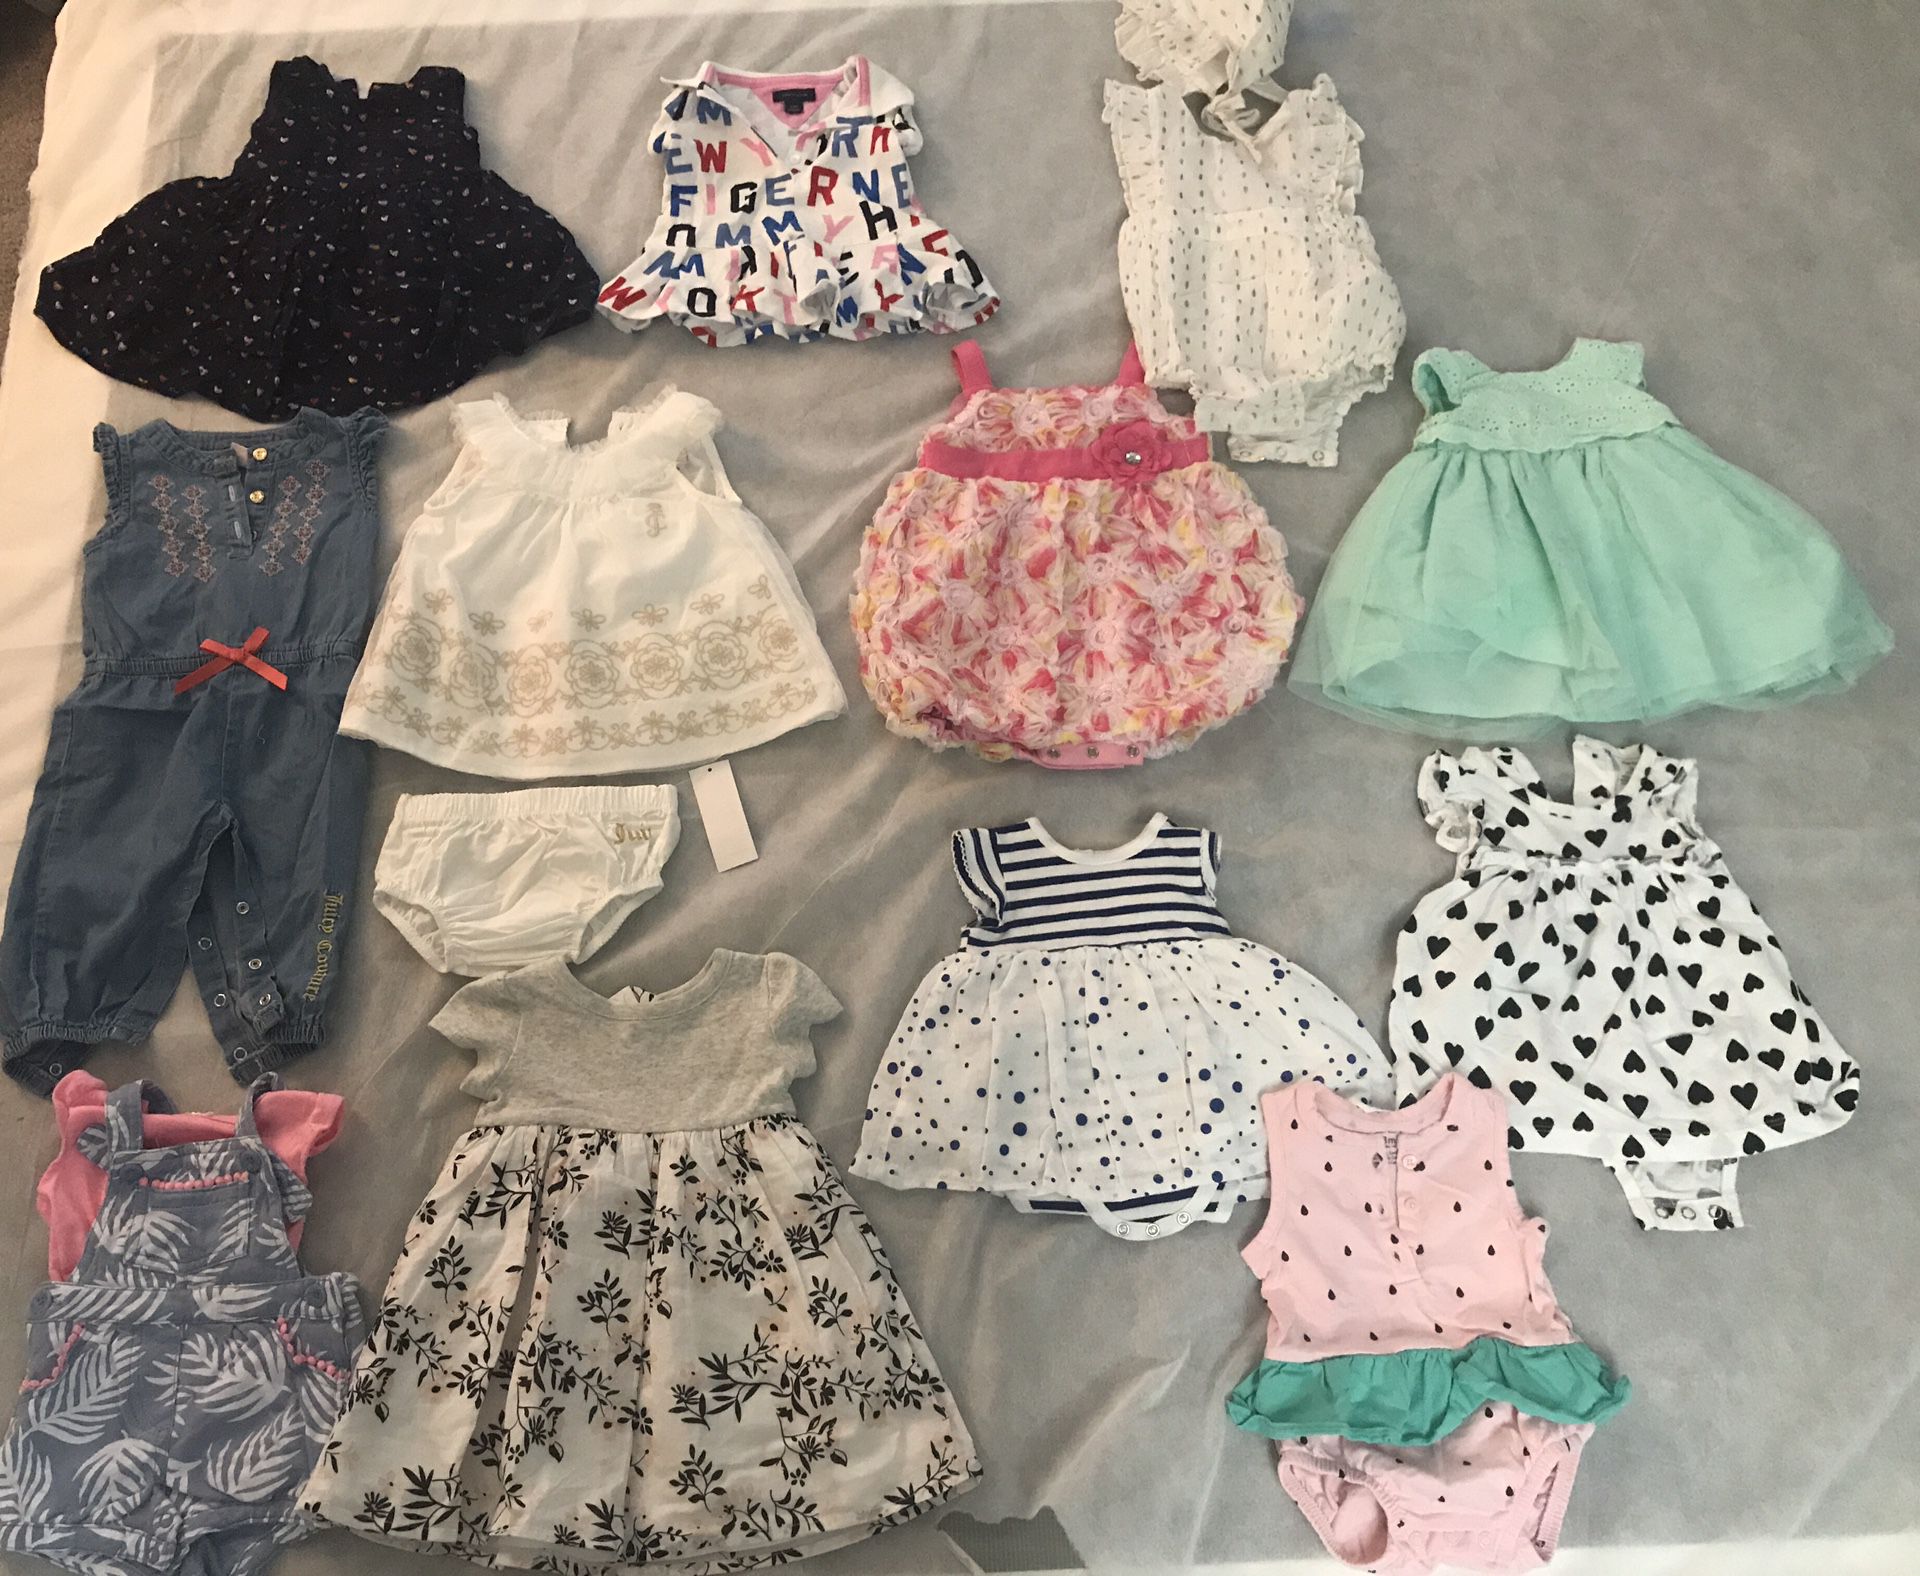 Baby girl clothing size 3-6 months (brands include Tommy Hilfiger, Juicy Couture, Carter’s and more!